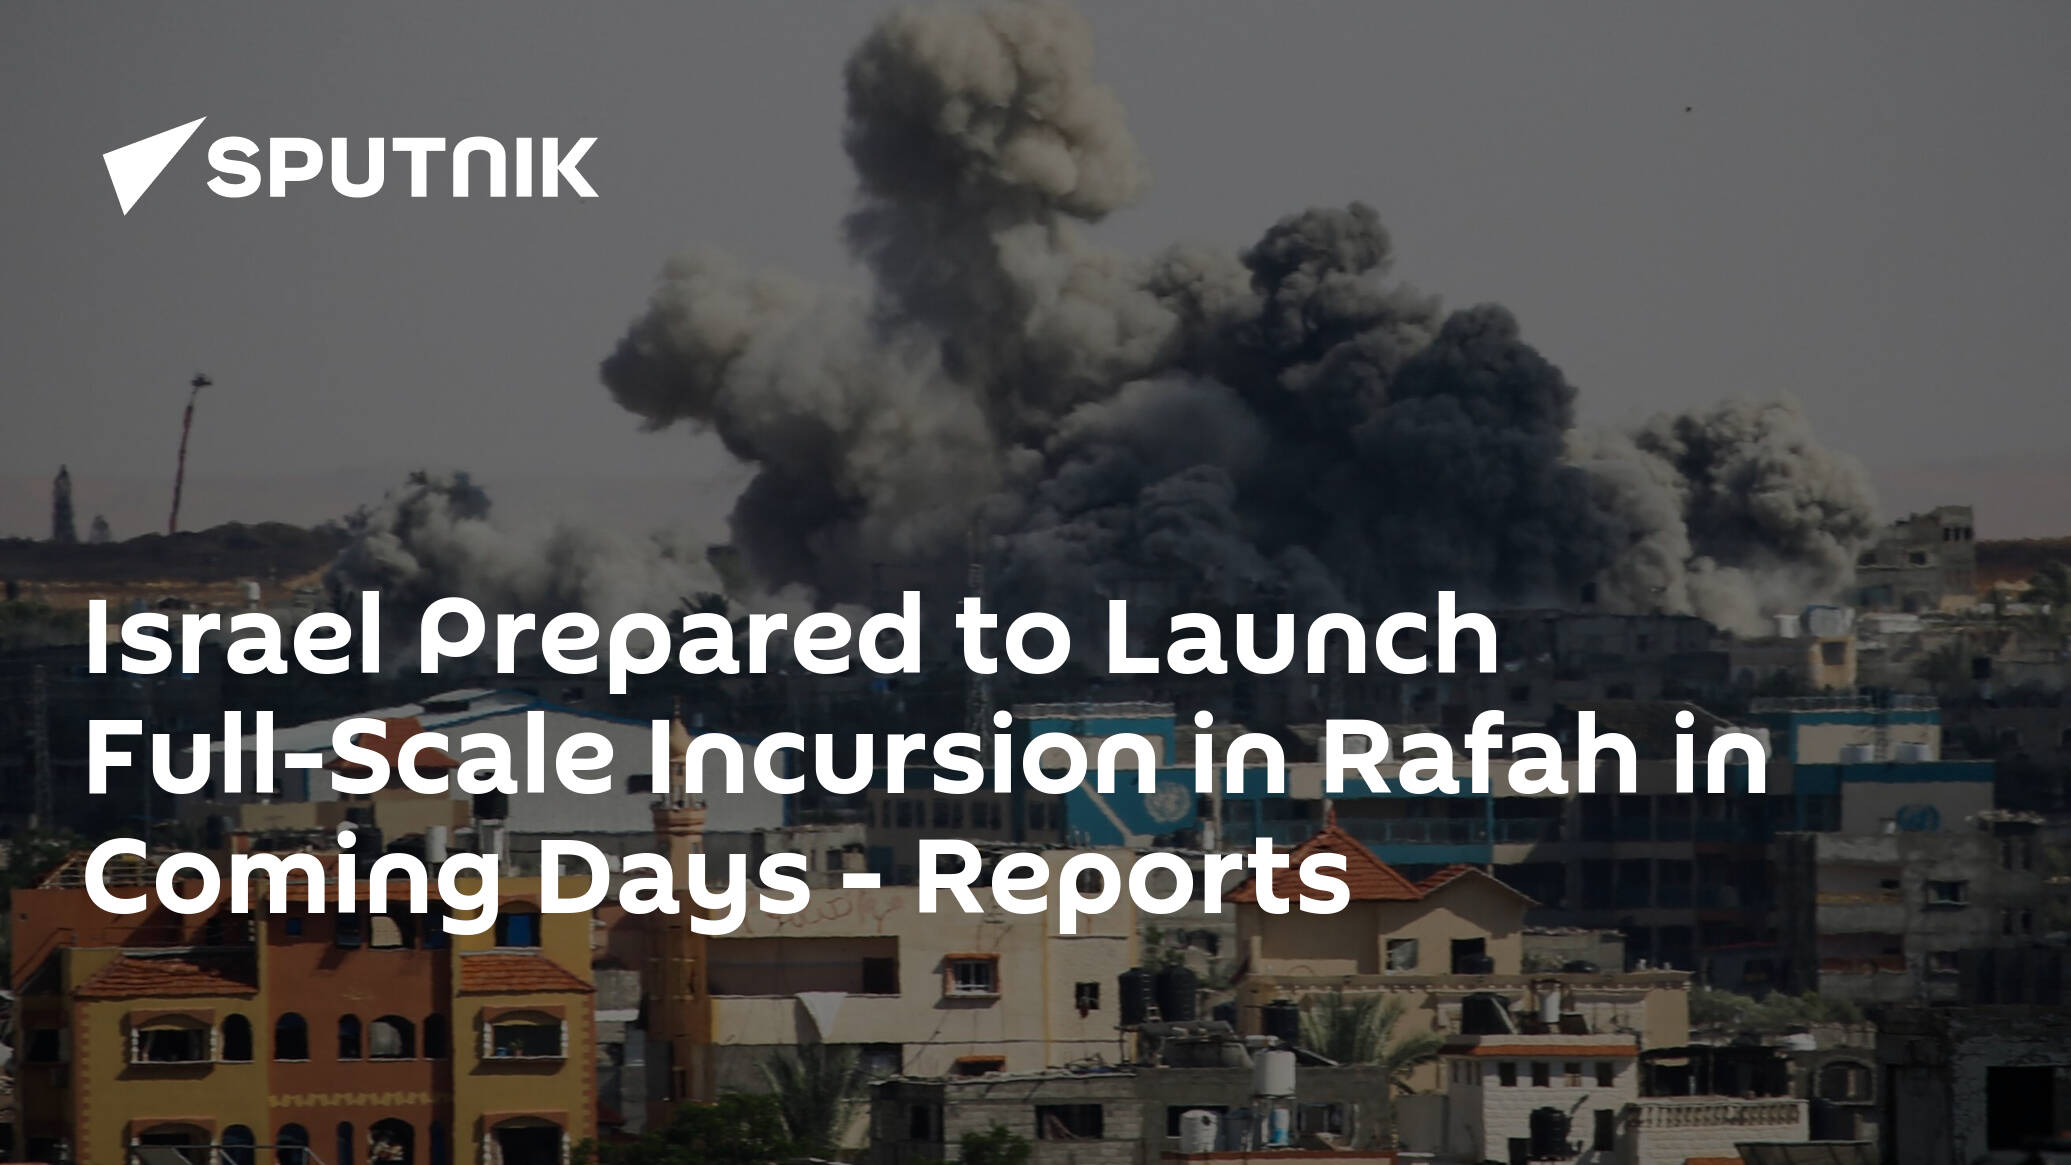 Israel Prepared to Launch Full-Scale Incursion in Rafah in Coming Days – Reports